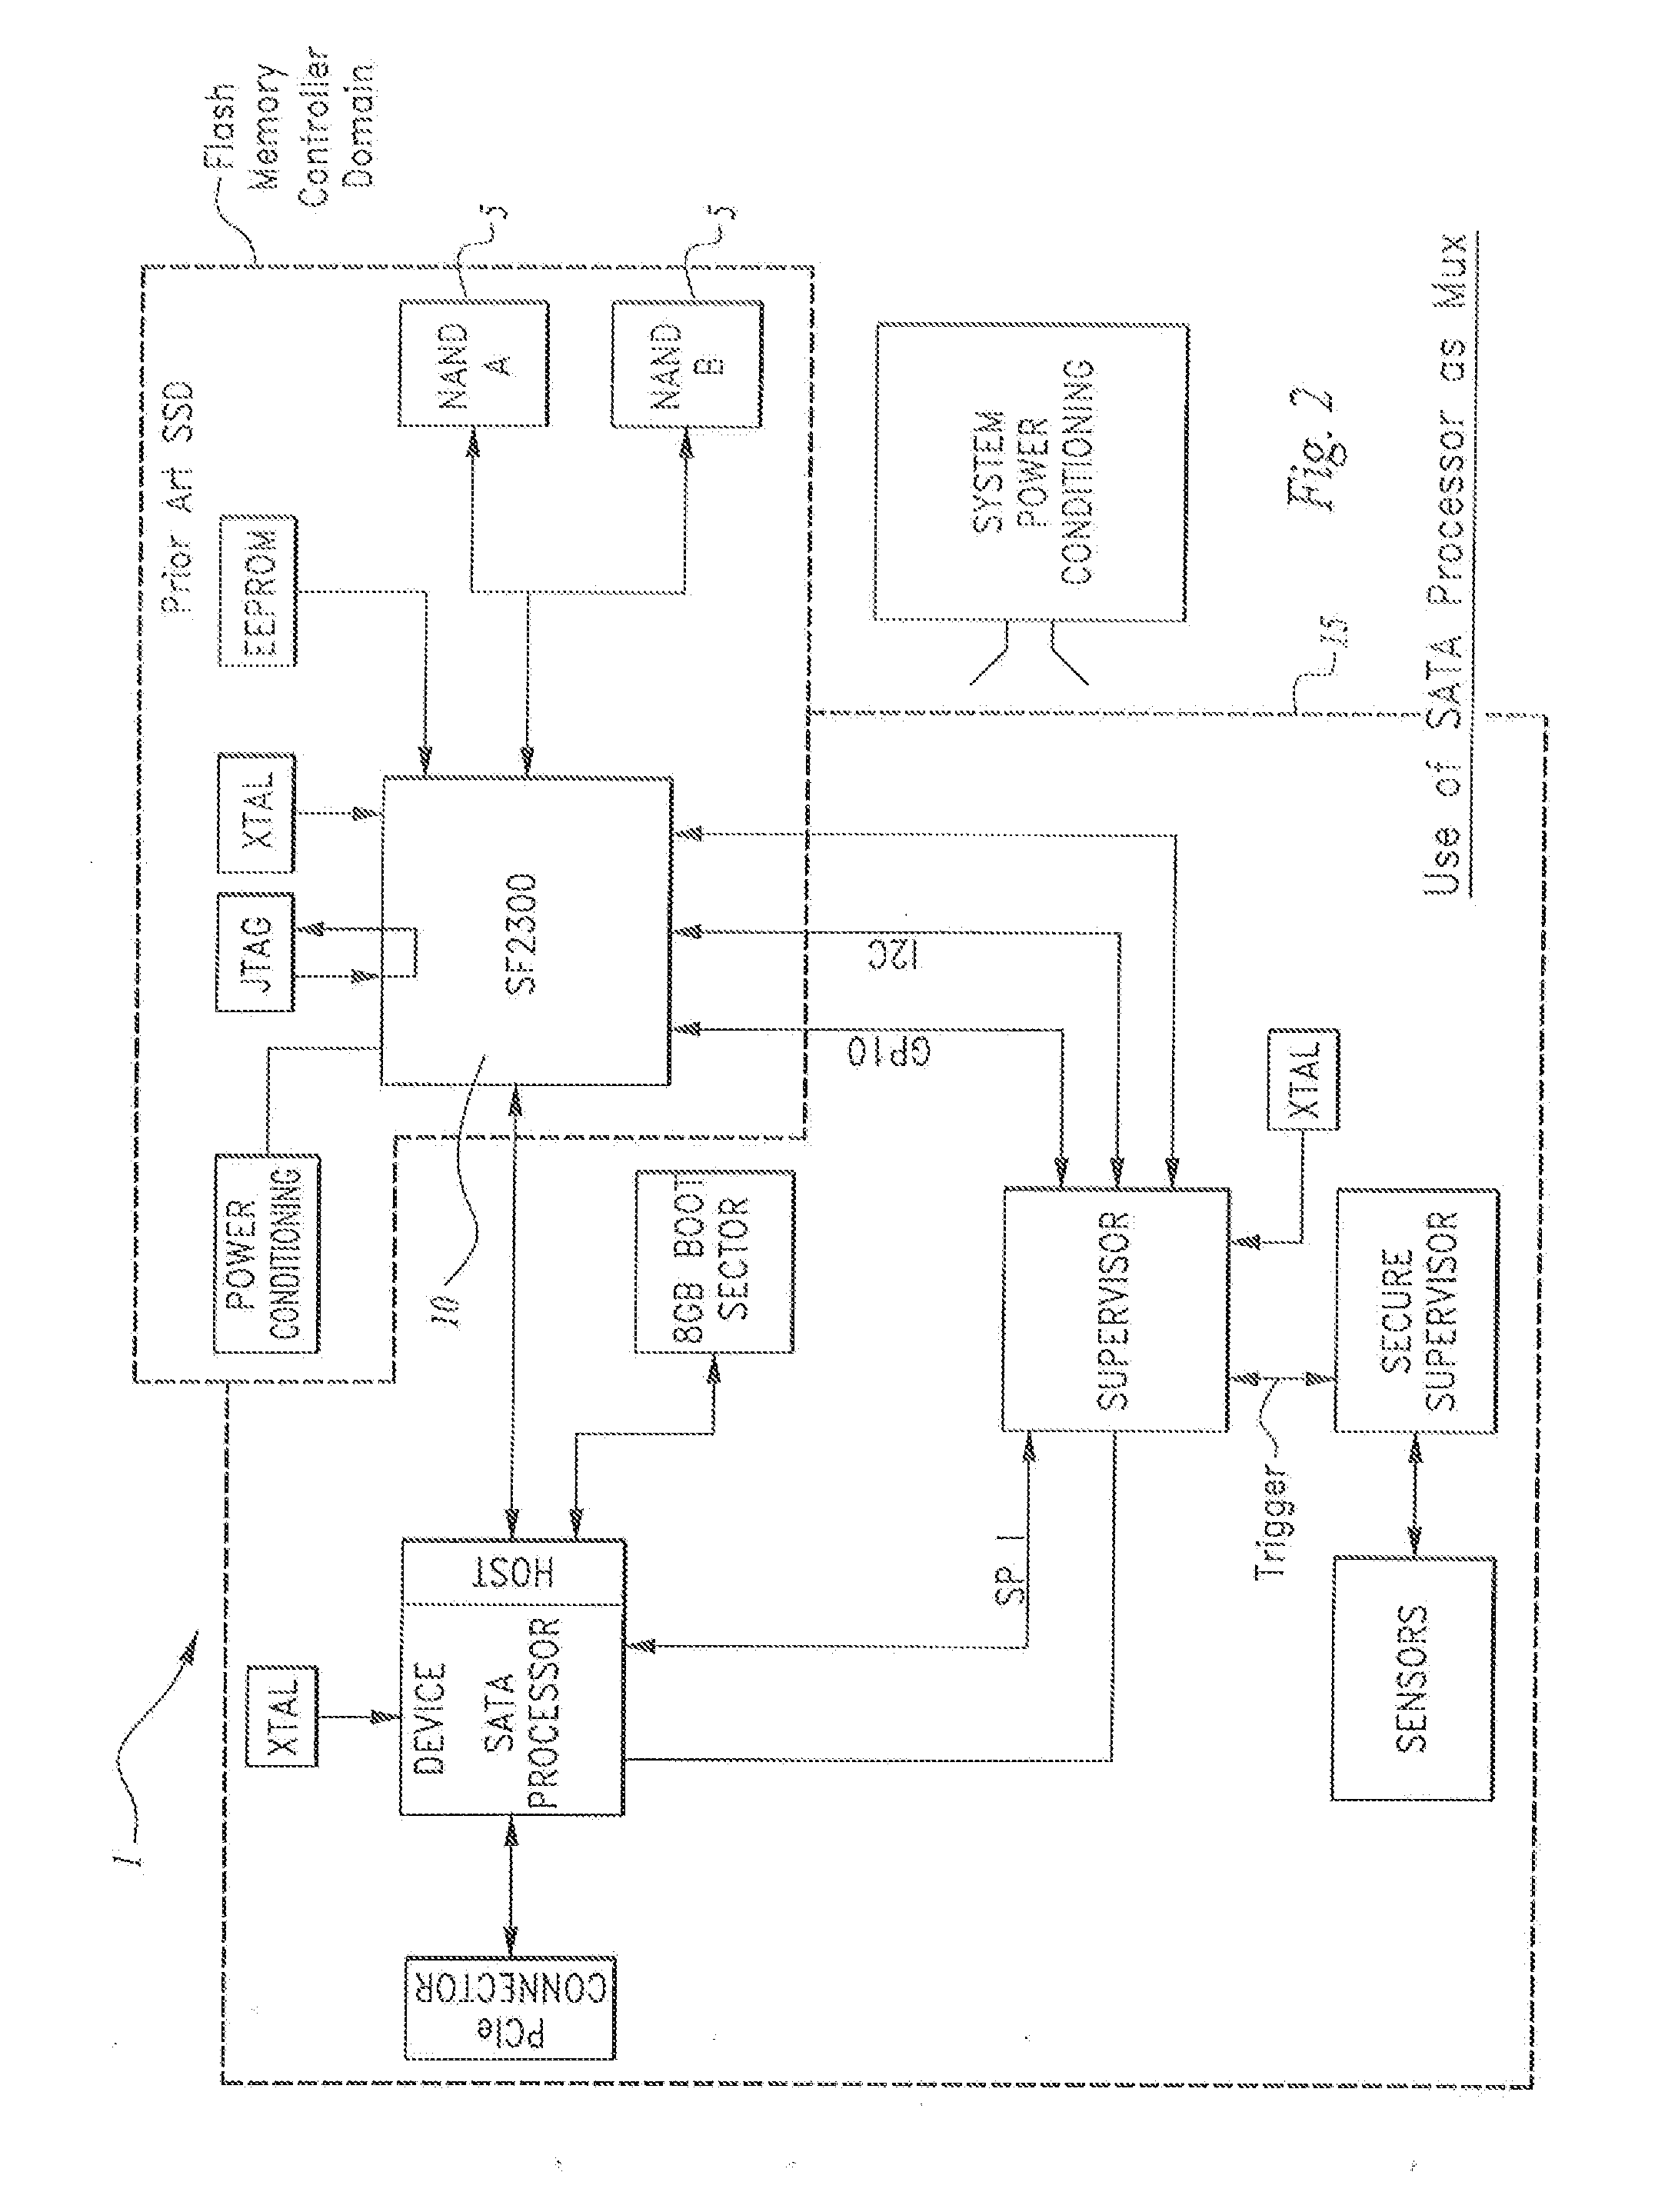 Solid State Drive Memory Device Comprising Secure Erase Function